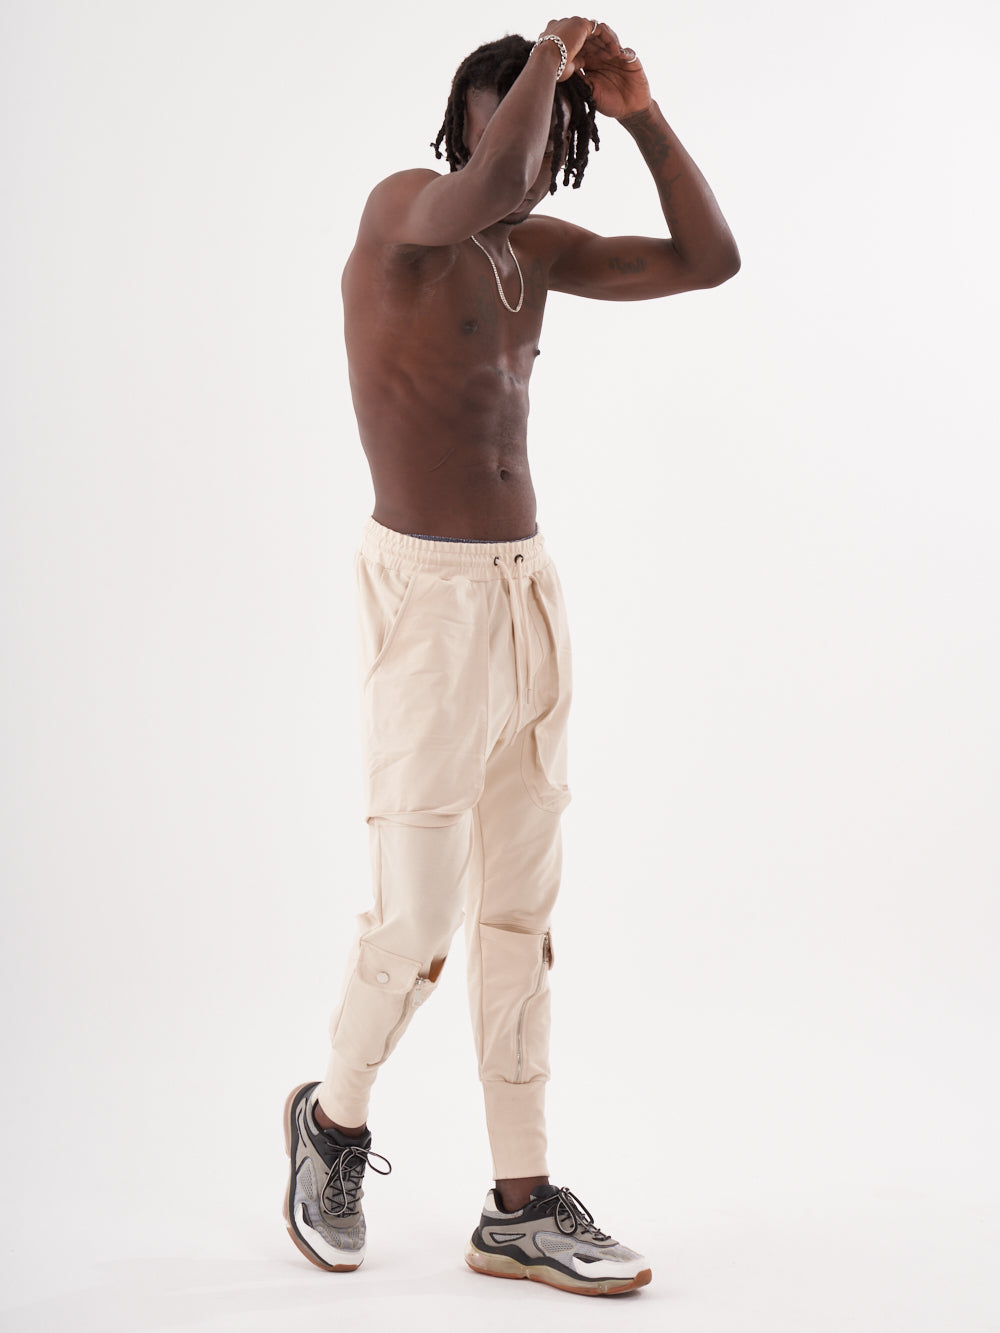 A man in GUERRILLA | BEIGE sweatpants is posing in front of a white background.